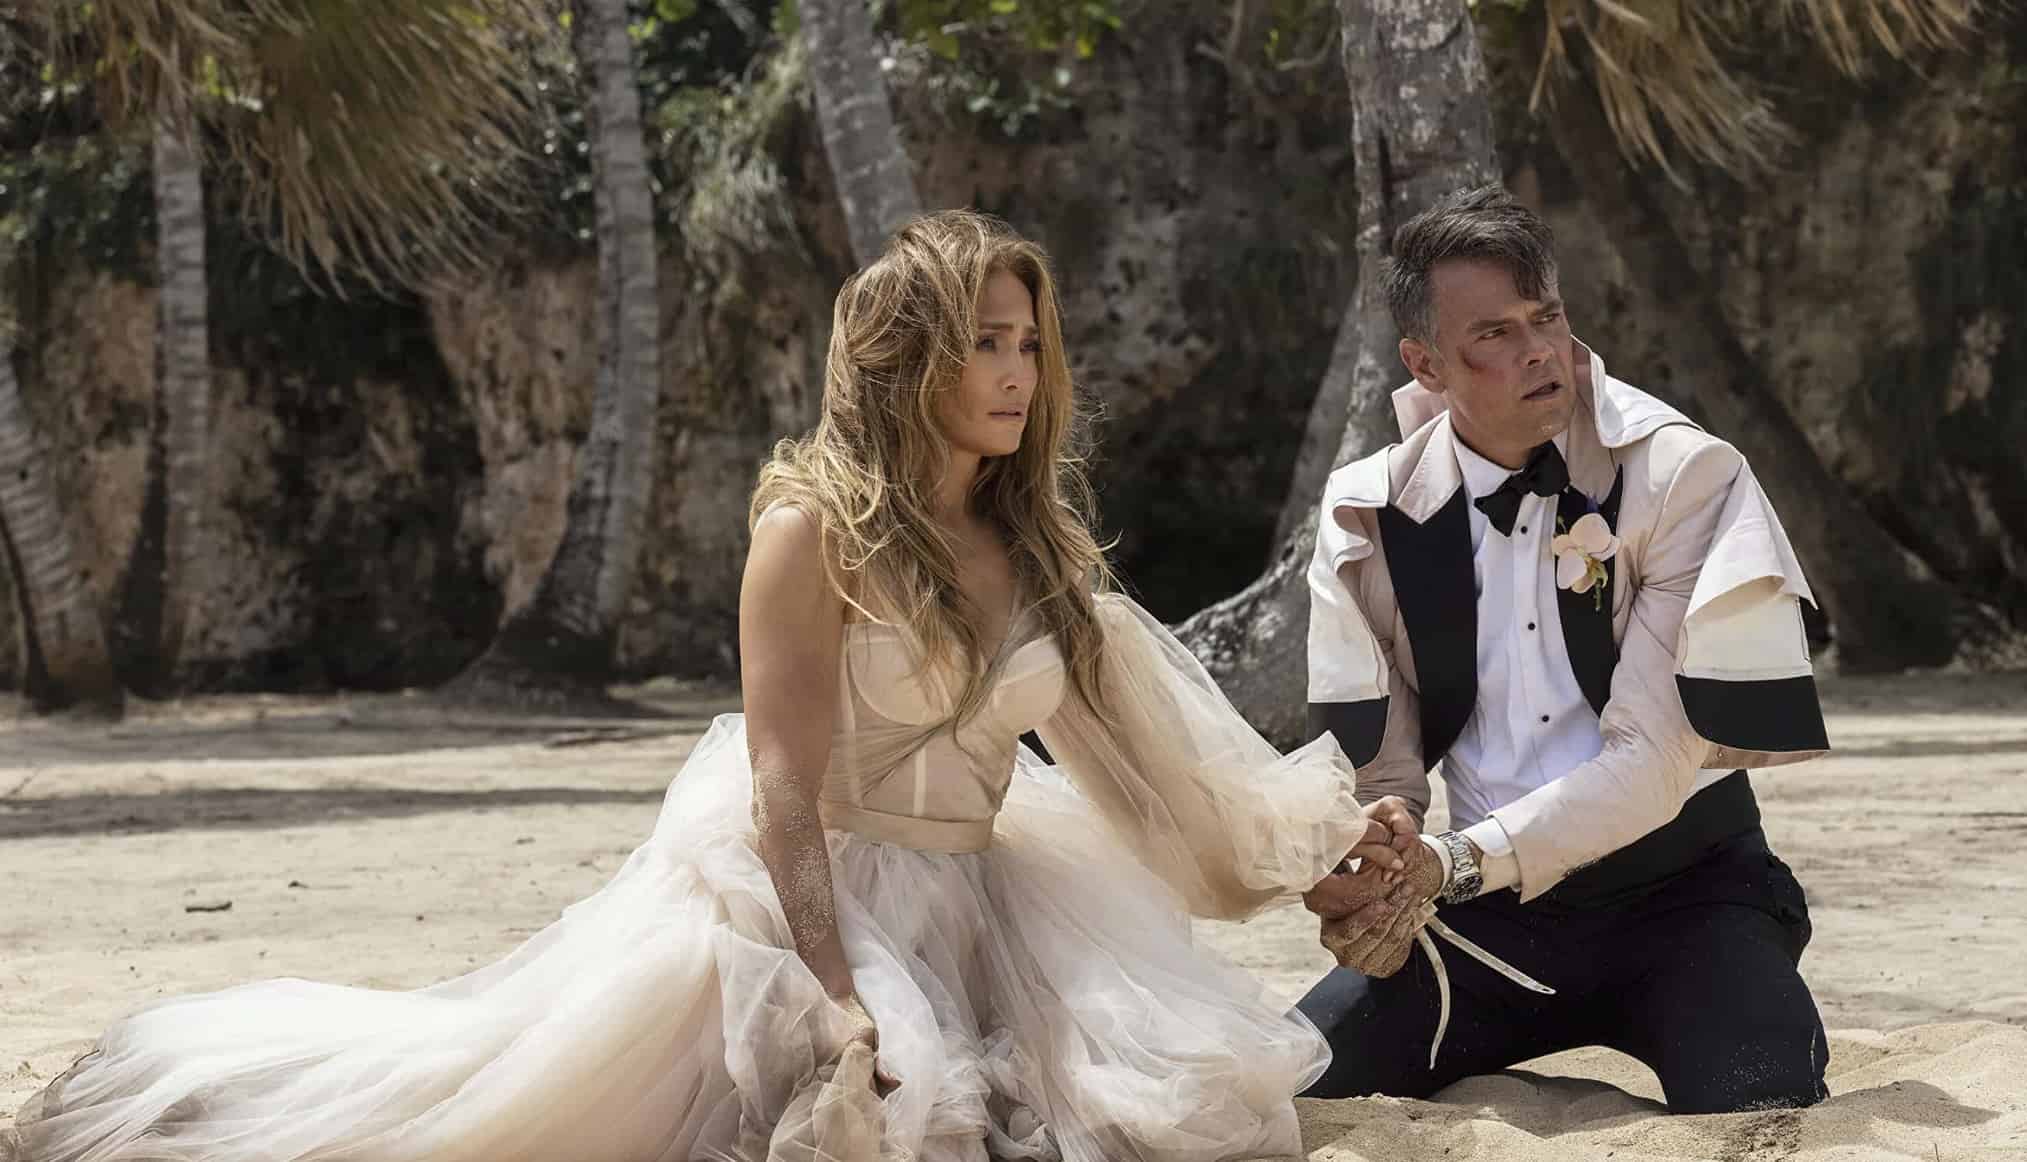 A woman and a man kneeling in the sand while wearing dirty and tattered wedding outfits in this image from Amazon Prime Video